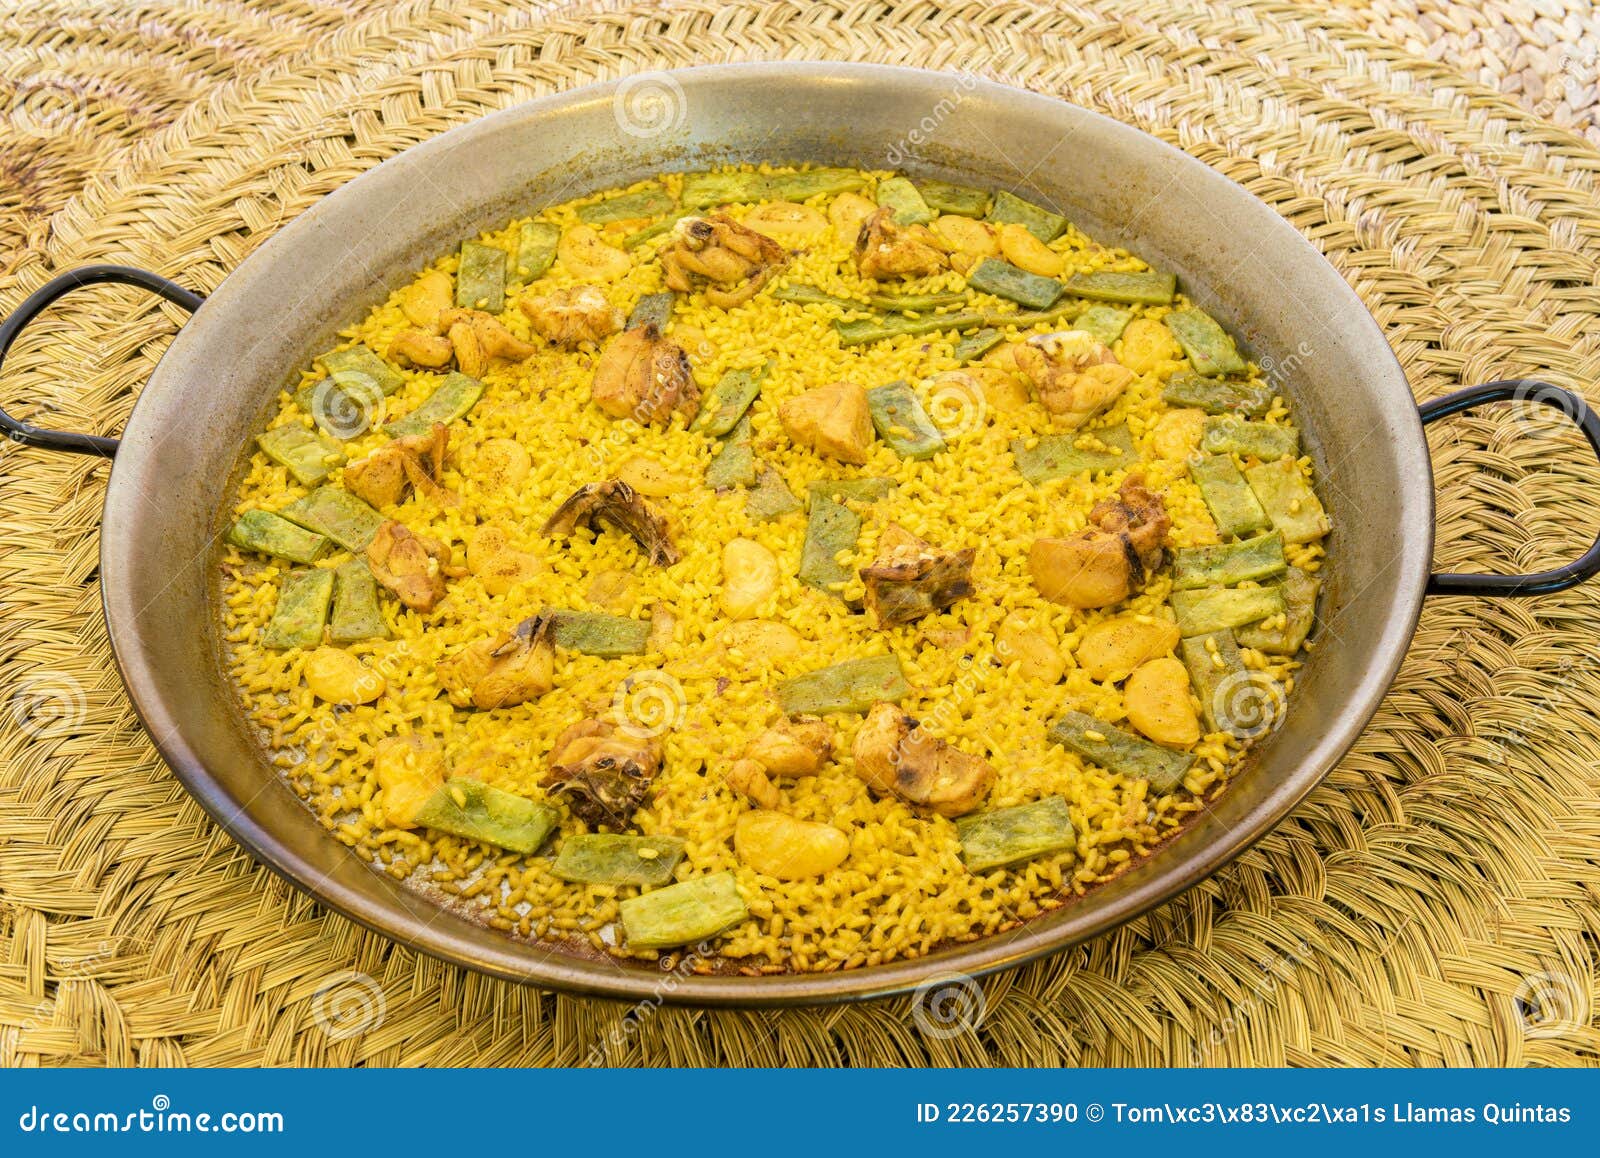 great and popular valencian rice paella presented in a paella pan with green flat beans, chunks of stewed chicken, white garrafon